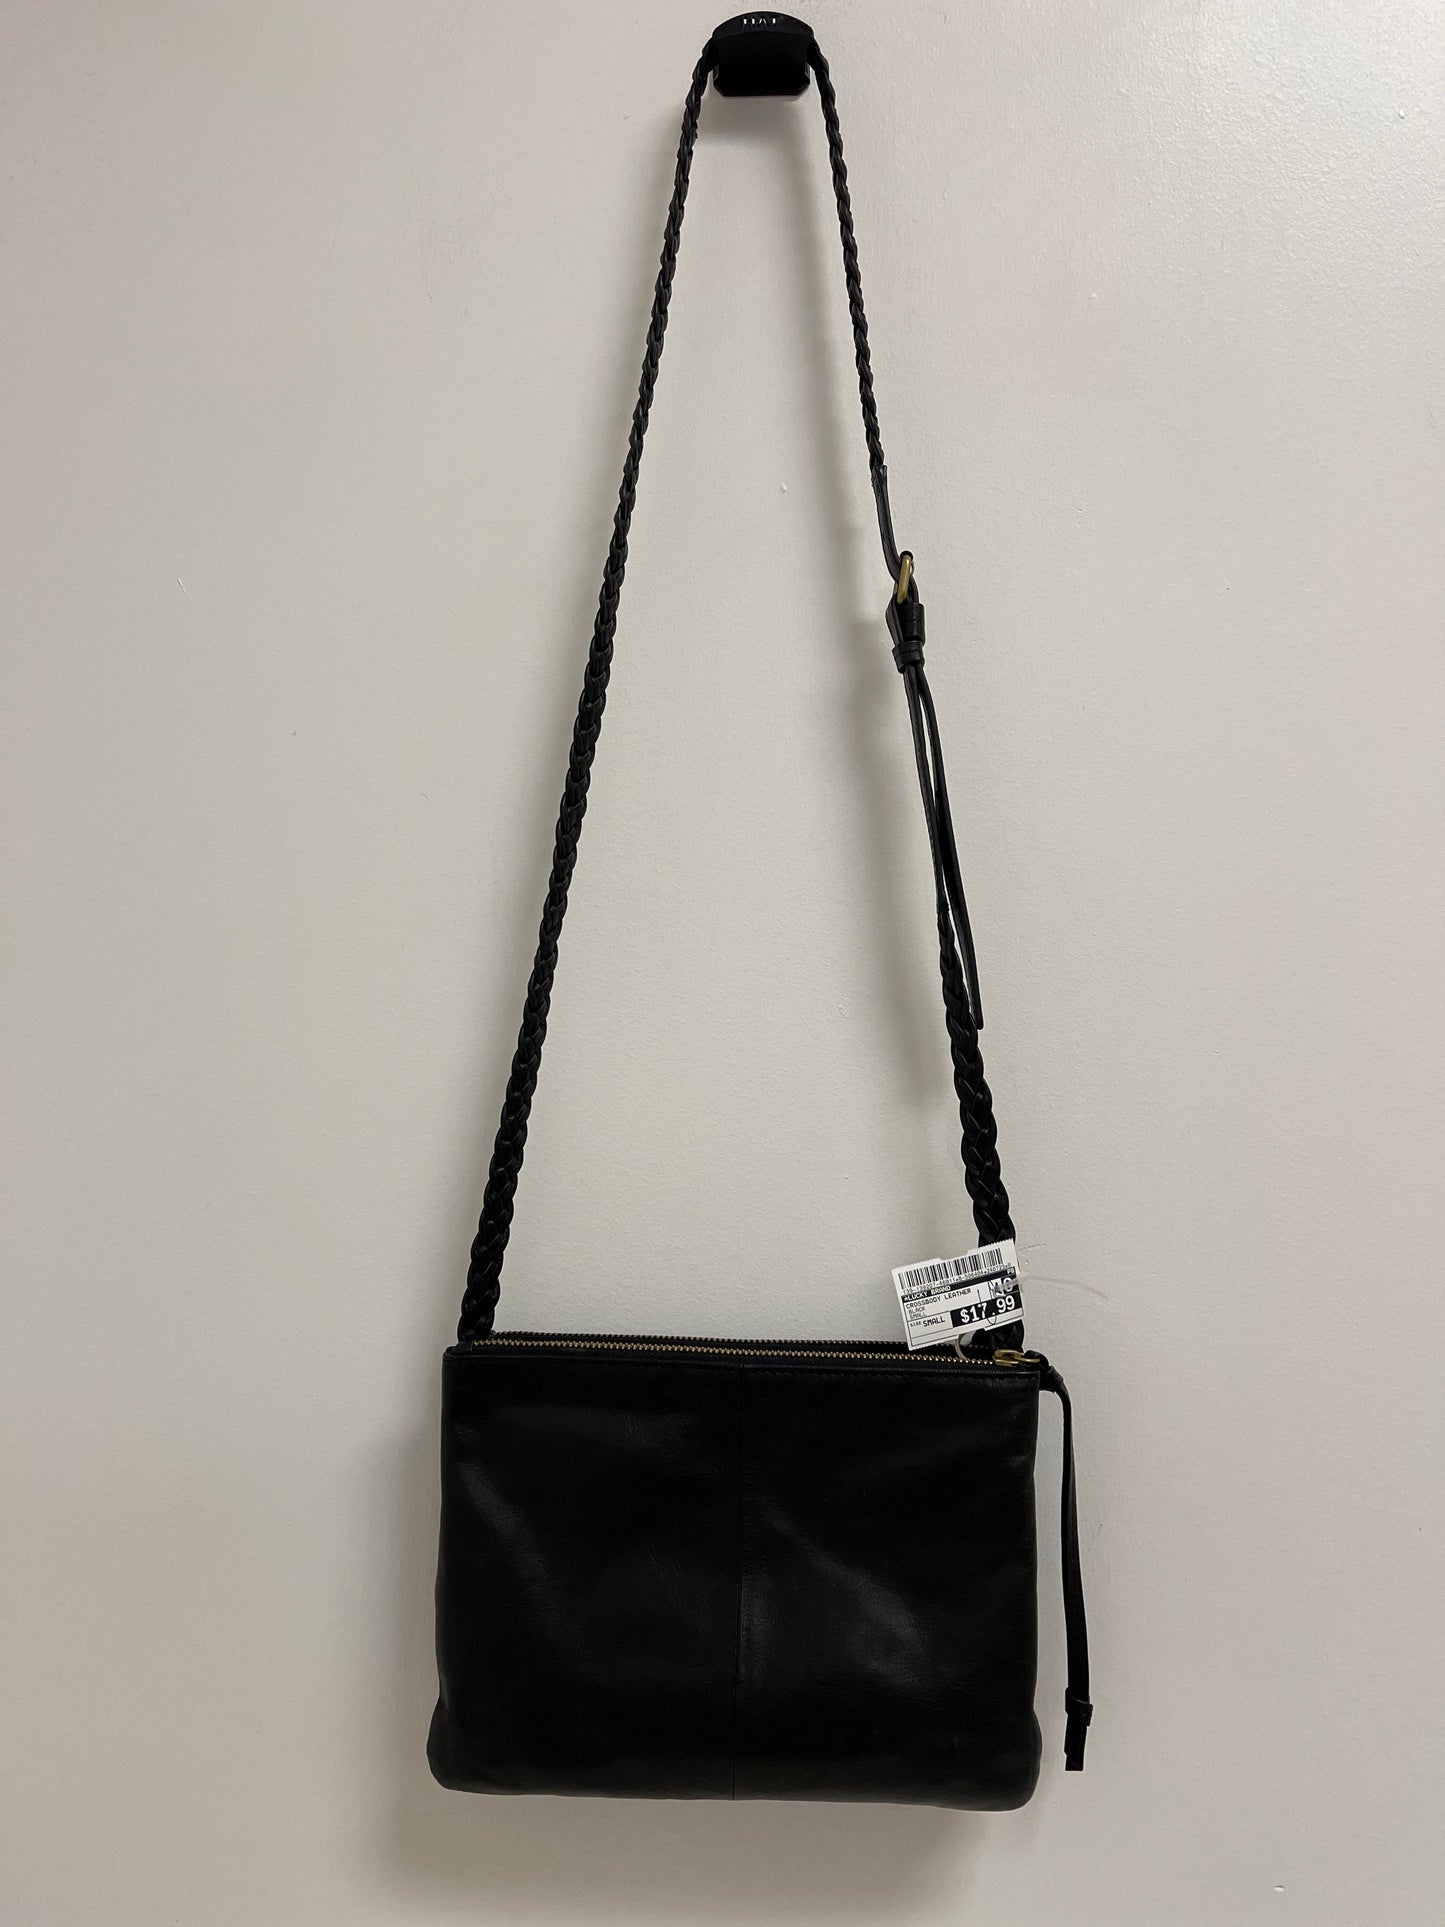 Crossbody Leather Lucky Brand, Size Small